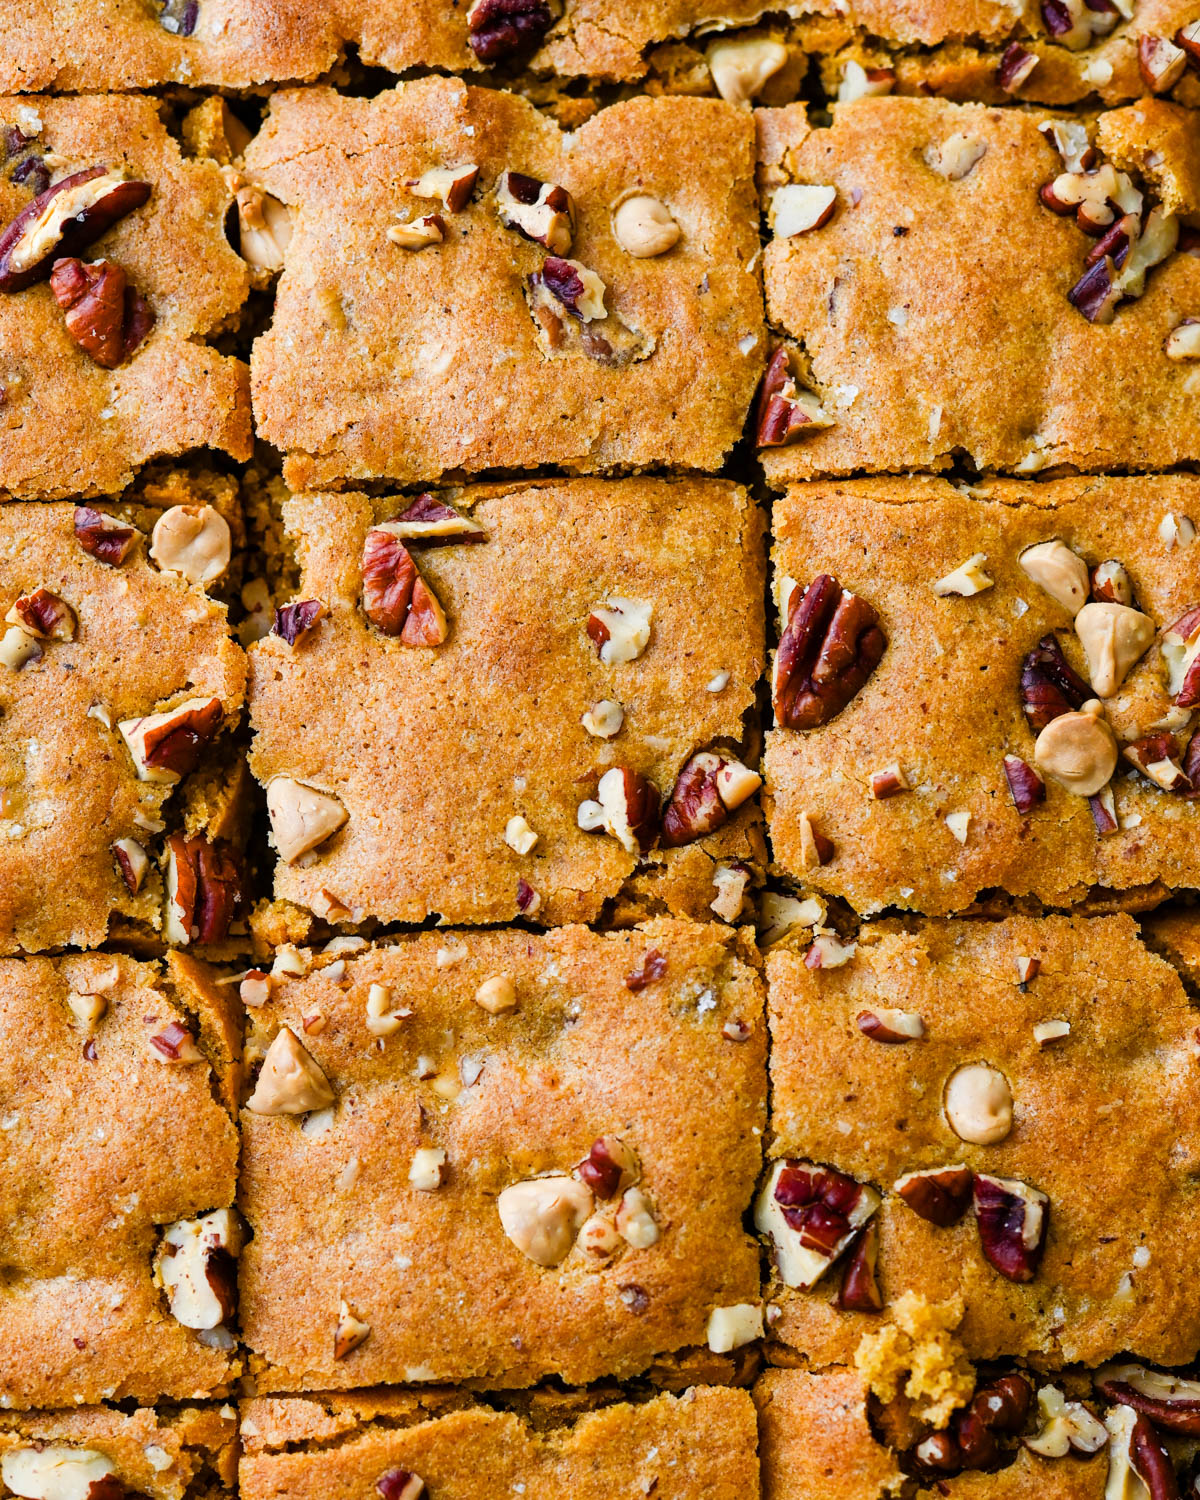 The sliced blondies speckled with pecans and white chocolate chips.